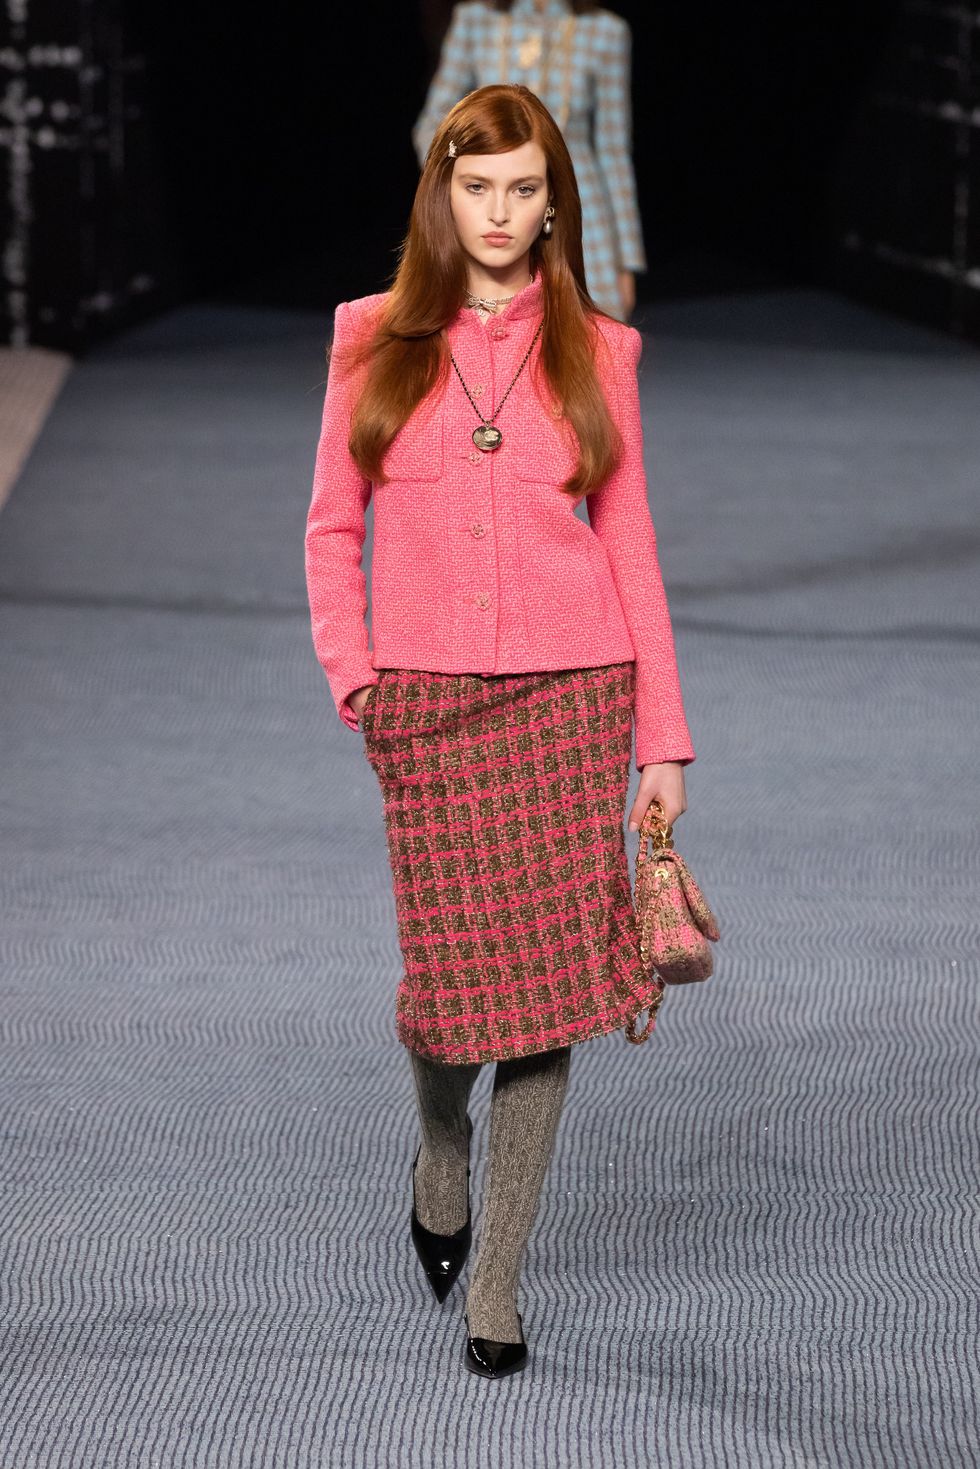 A tweed Chanel purse spotted at New York Fashion Week.